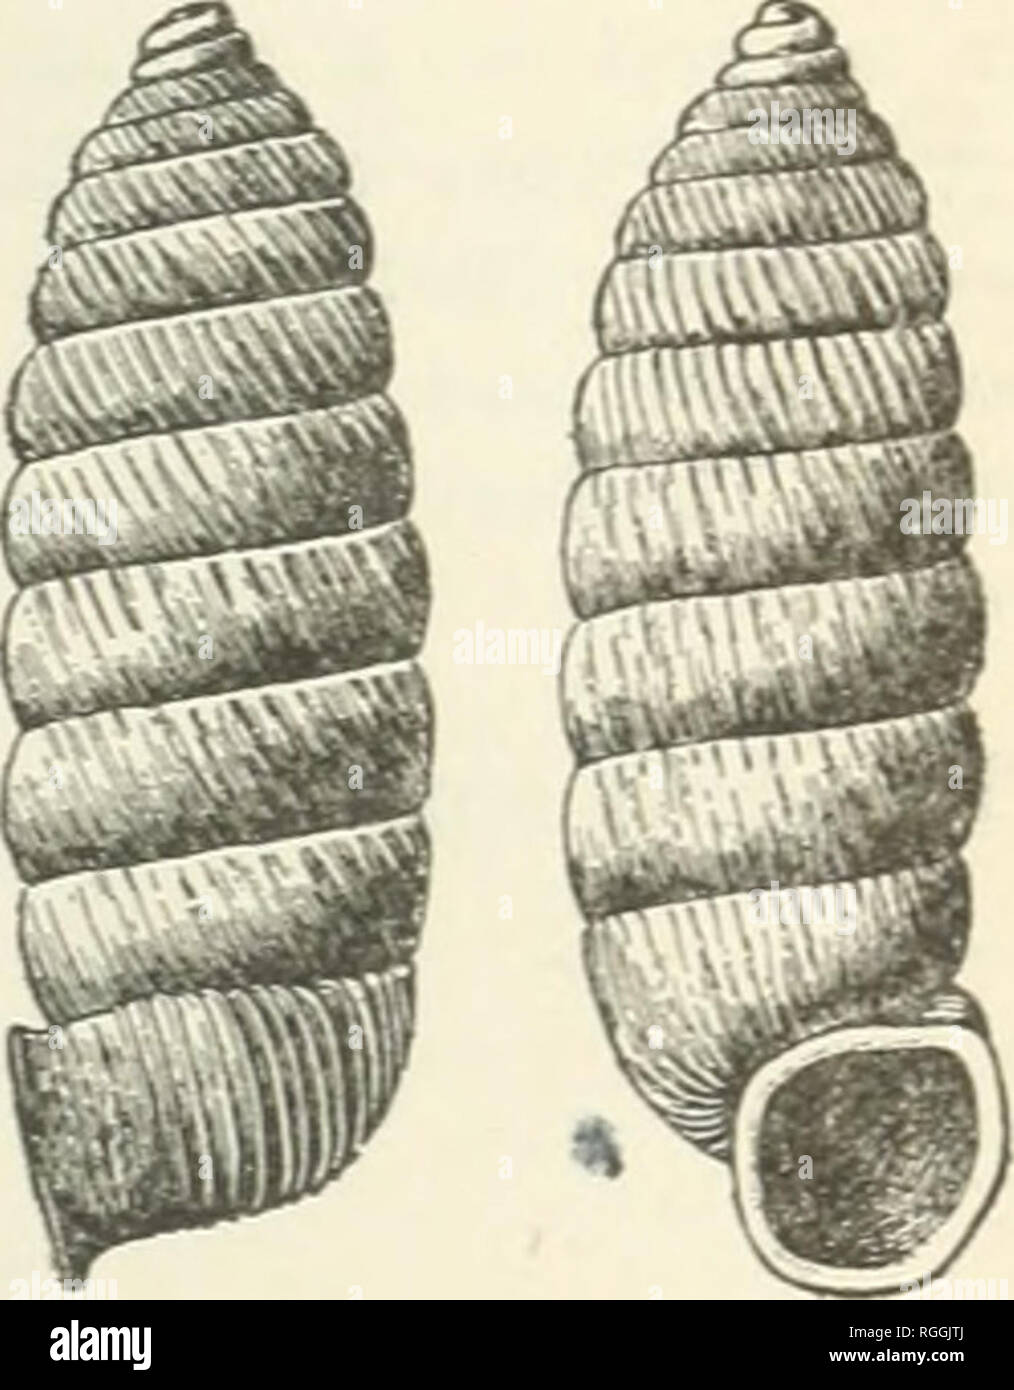 . Bulletin of the Museum of Comparative Zoology at Harvard College. Zoology; Zoology. MUSEUM OF COMPARATIVE ZOOLOGY. 201 Liguus fasciatus, Mull. Plate I. Fig. 5, The Vaccas Key variety, noticed in page 435 of the Manual of American Land Shells, is figured in the plate. Orthalicus undatus, Beug. Plate II. Fig. 4. I give a new figure of the variety of this species. Holospira Arizonensis, Steabns. Shell dextral, elongately cylindrical, pupiform, dingy white to pale horn-color, translucent. Number of wiiorls, twelve to thirteen. Shghtly convex, the su- tures distinctly defined. The upper six or se Stock Photo